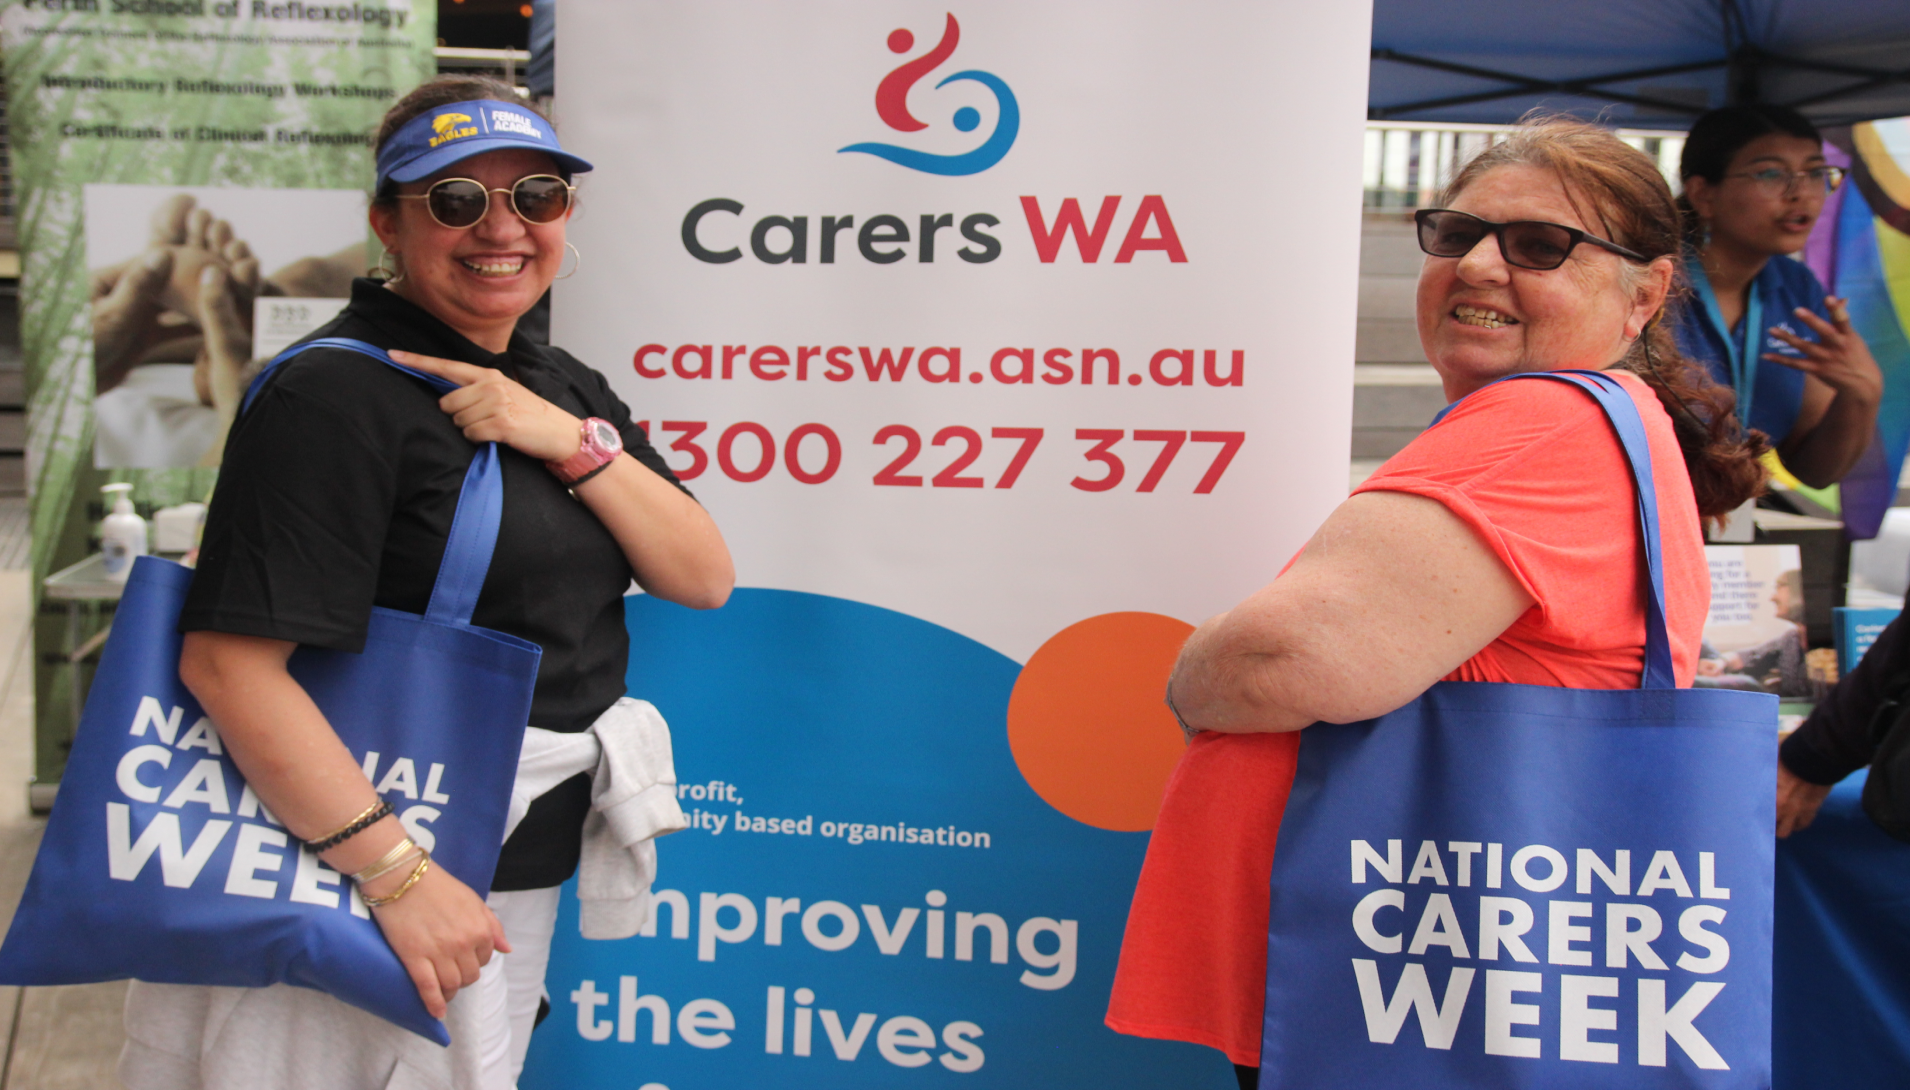 Two women at the Carer's week event standing happily in front of a banner